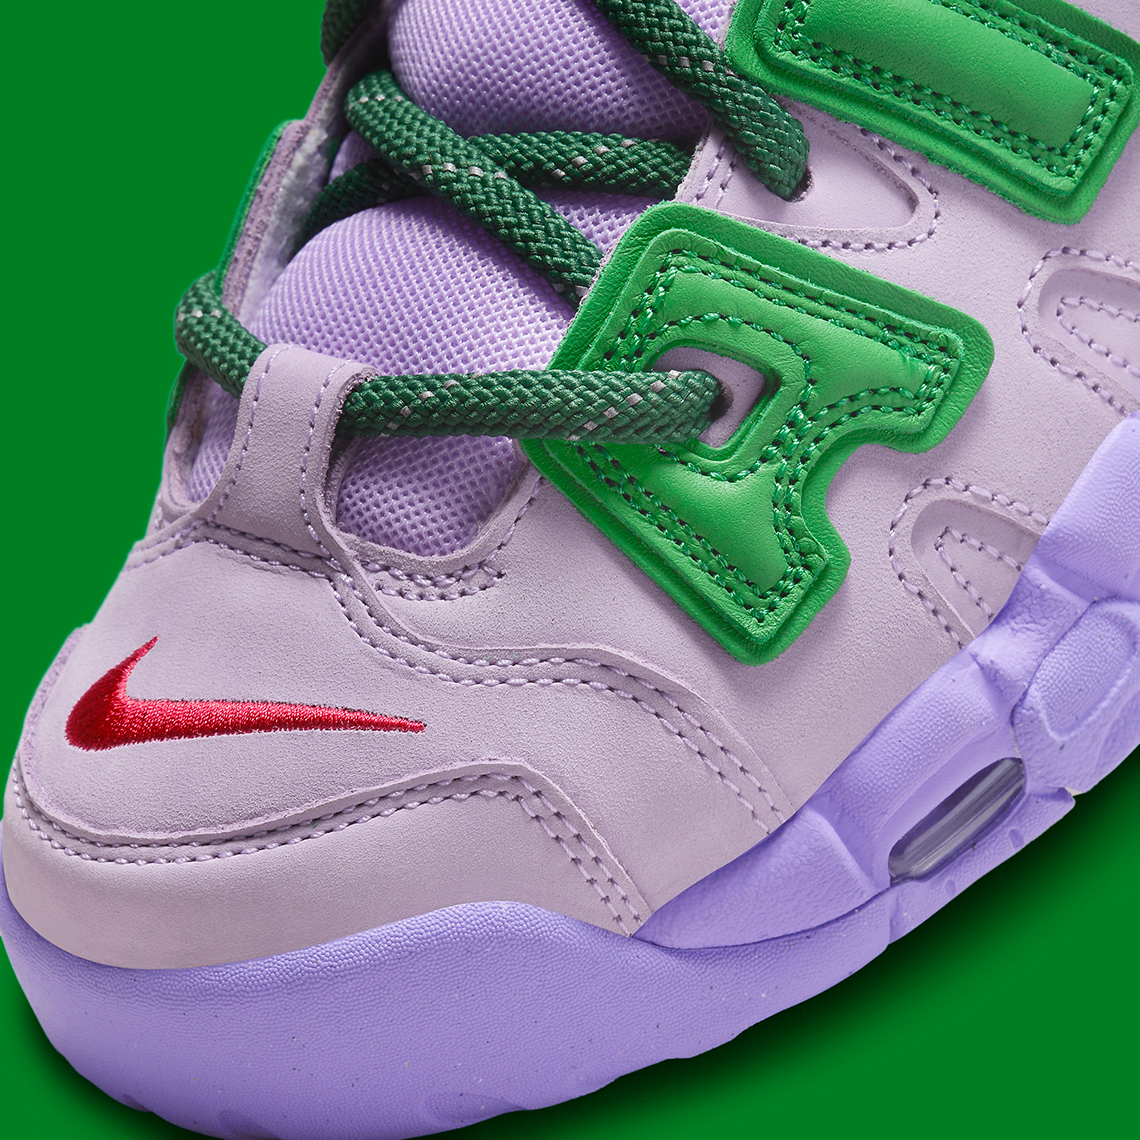 ambush buy nike air more uptempo lilac university red team green apple green fb1299 500 release date 6